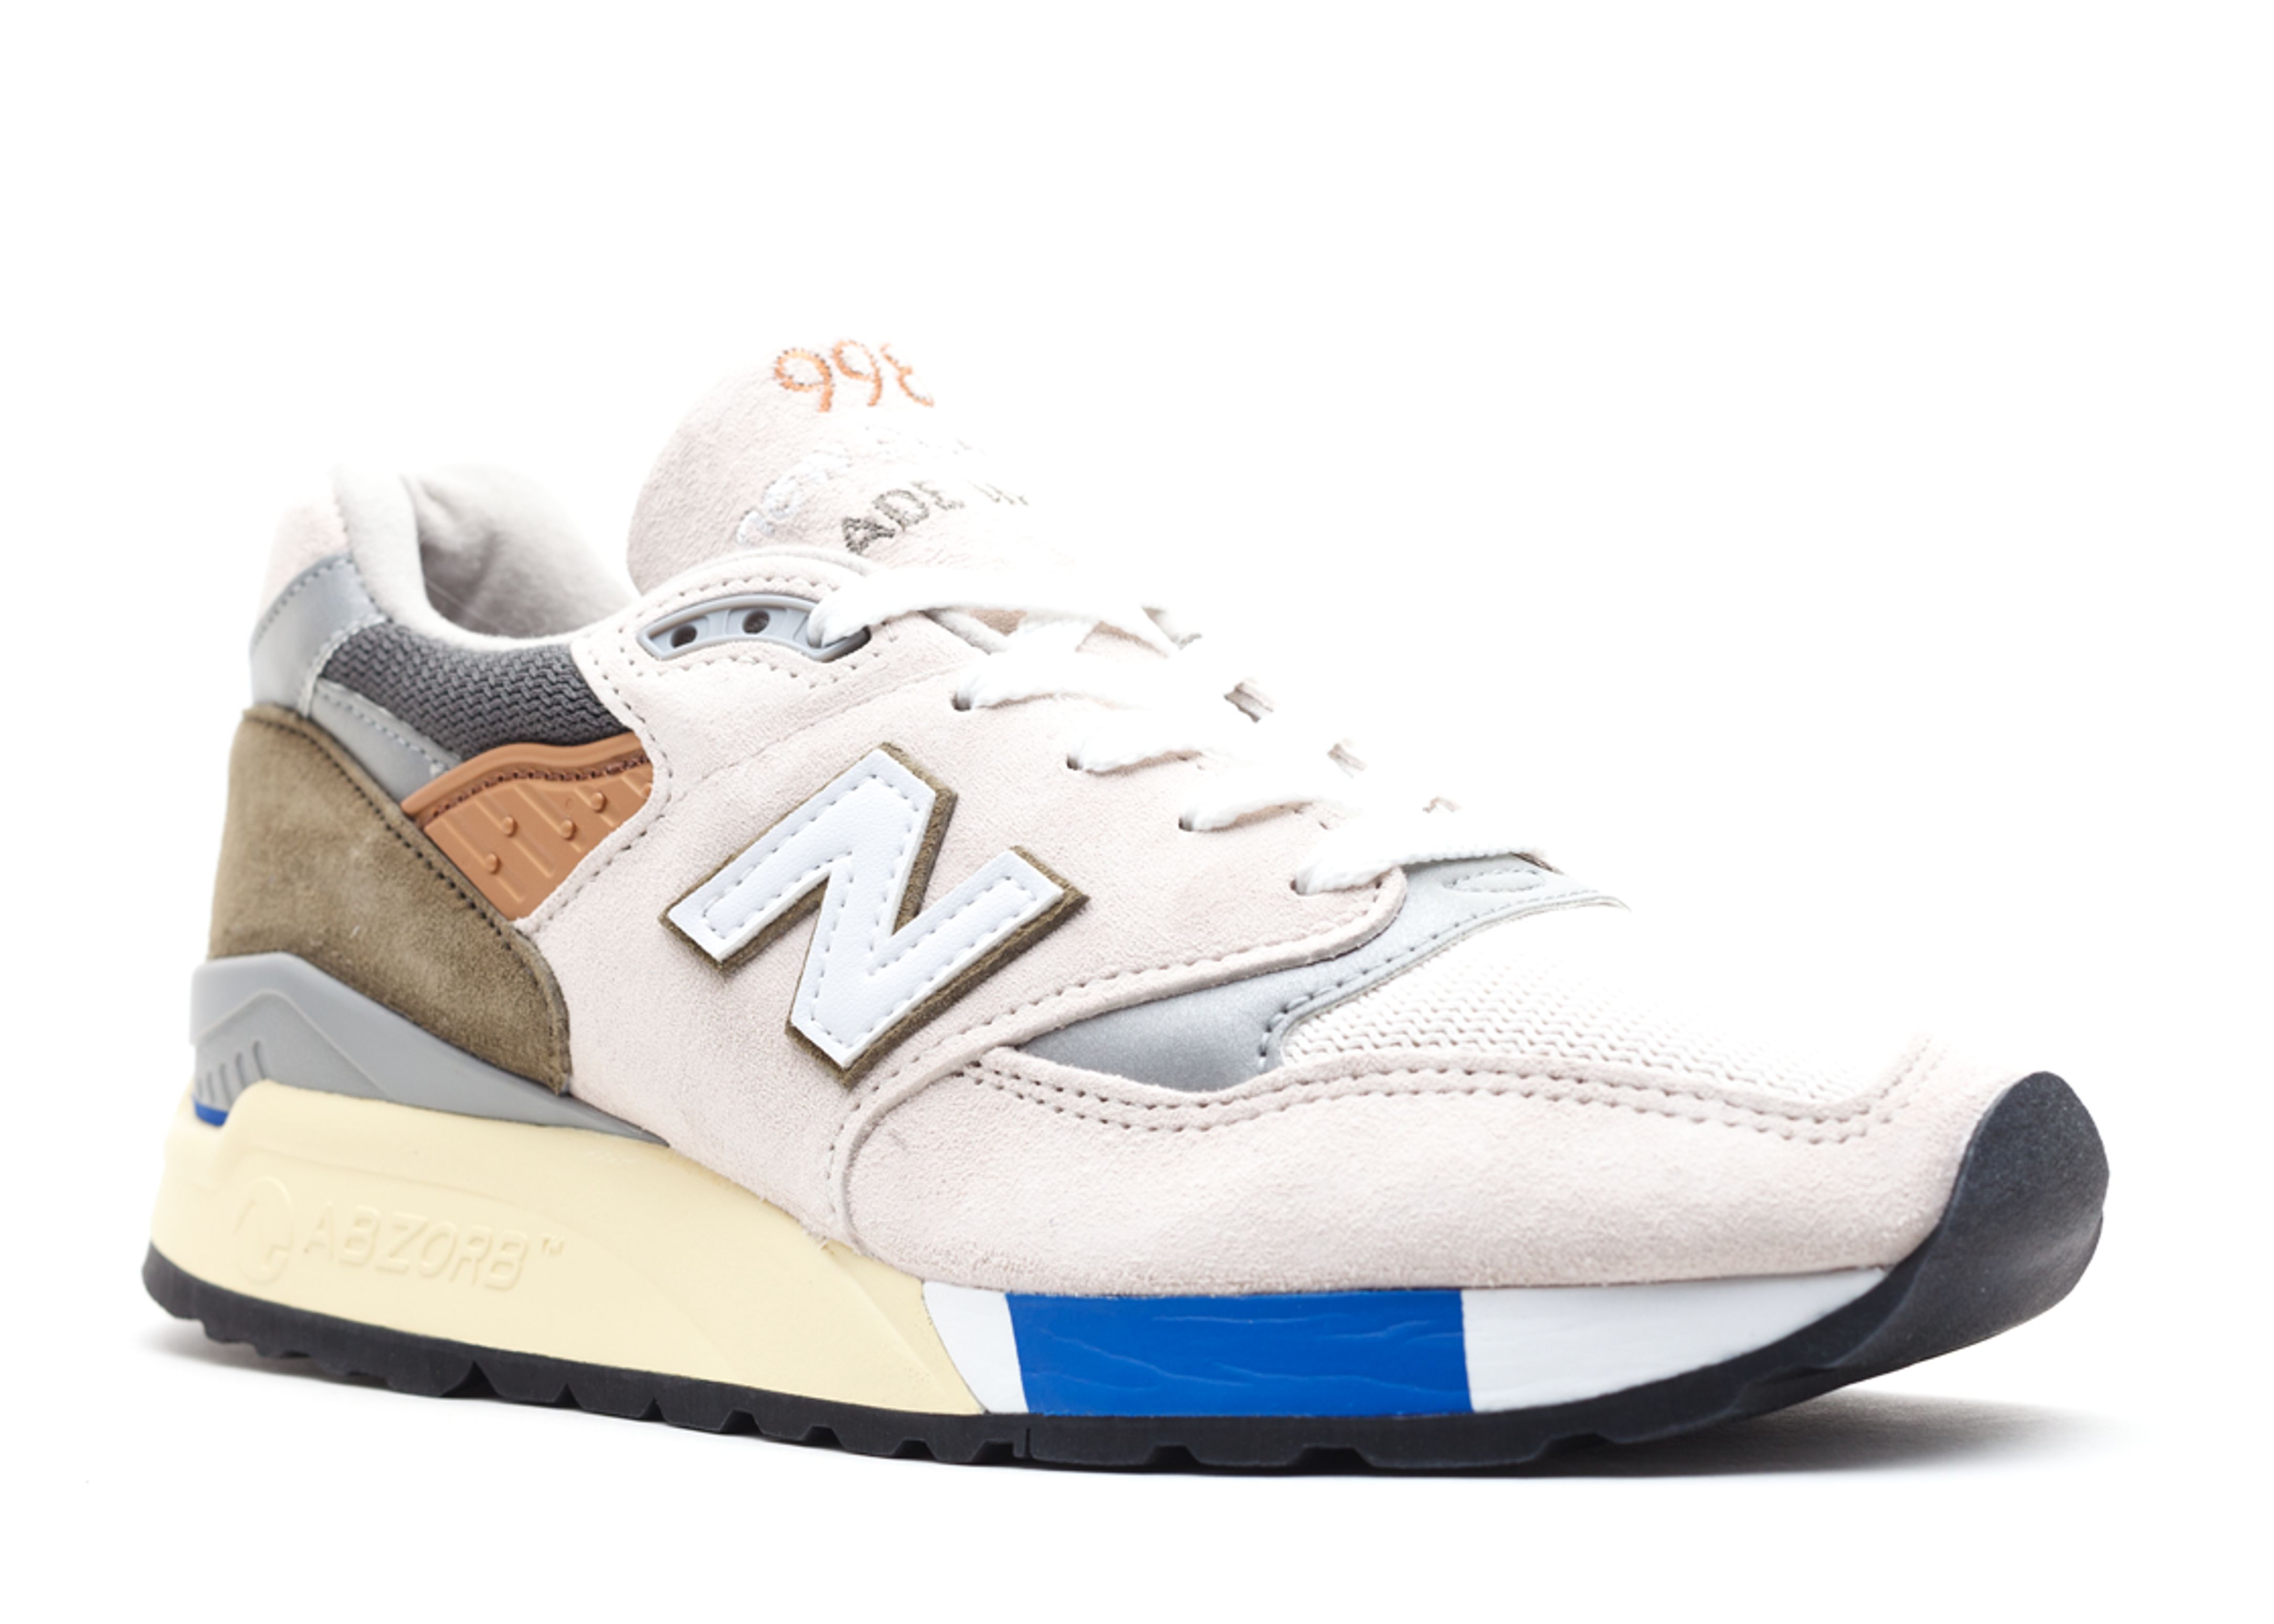 Concepts x 998 Made in USA 'C-Note'